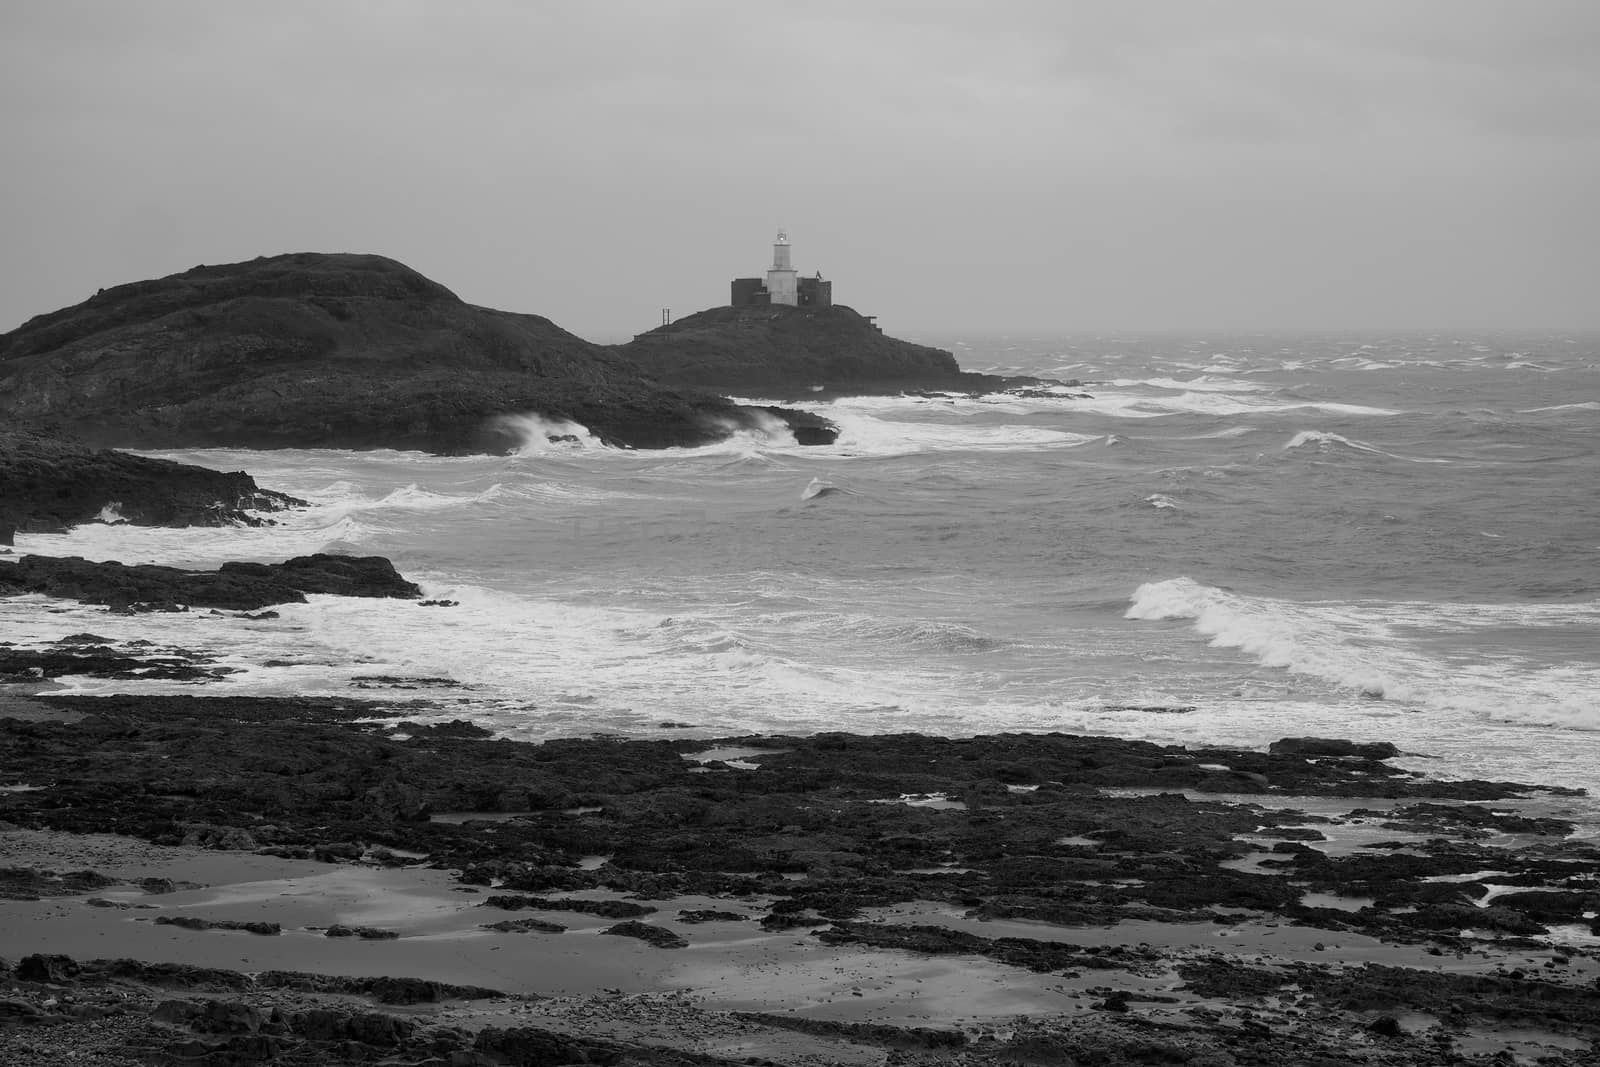 Mumbles Lighthouse lit up on a stormy day overlooking Bracelet Bay, shot in monochrome, the Gower Peninsula near Swansea, South Wales